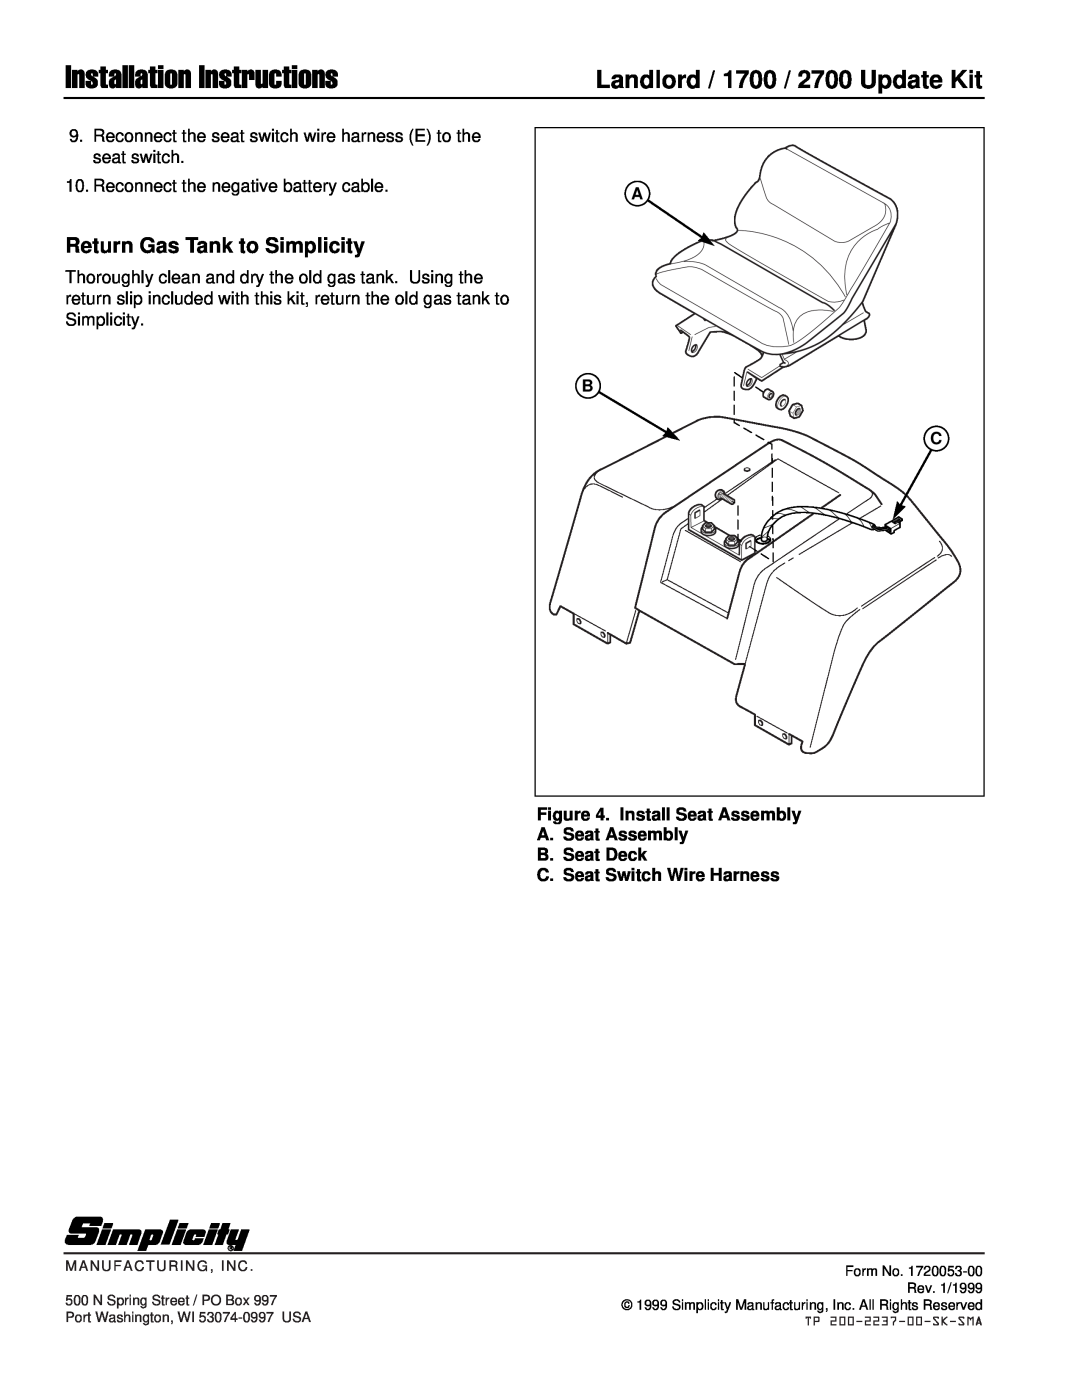 Simplicity 1719779 Return Gas Tank to Simplicity, Installation Instructions, Landlord / 1700 / 2700 Update Kit, Form No 